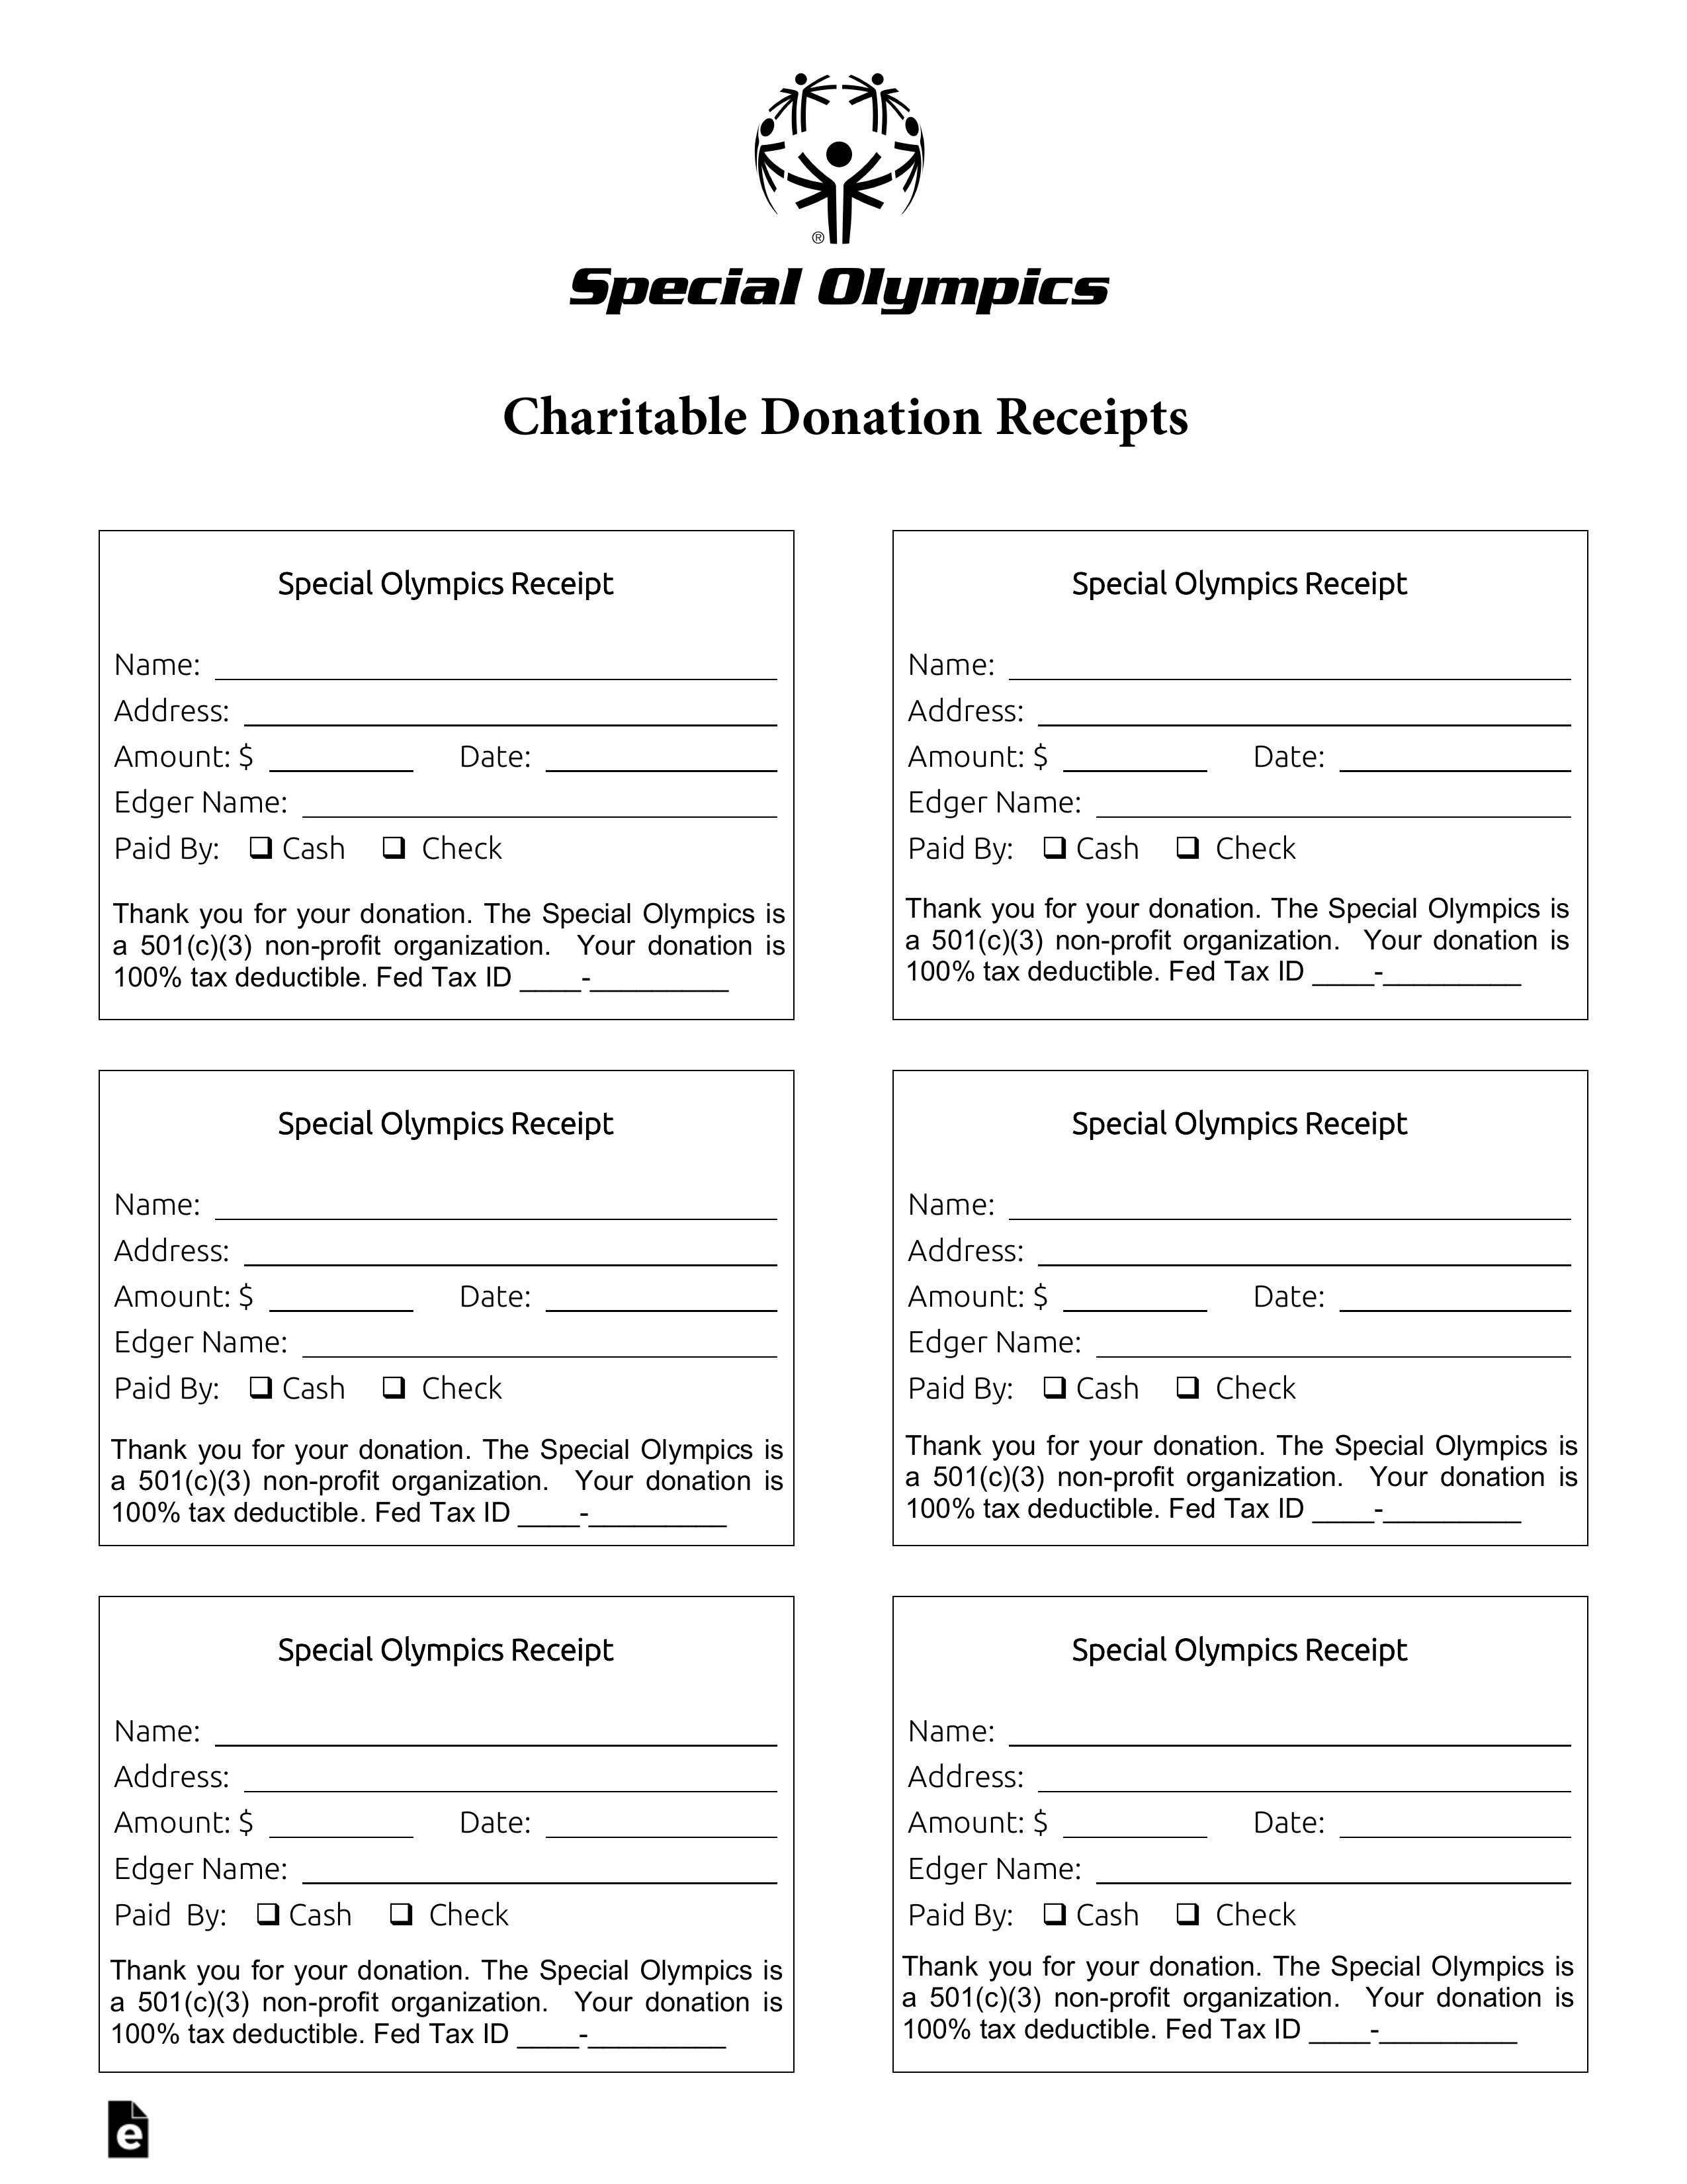 Special Olympics Donation Receipt Template